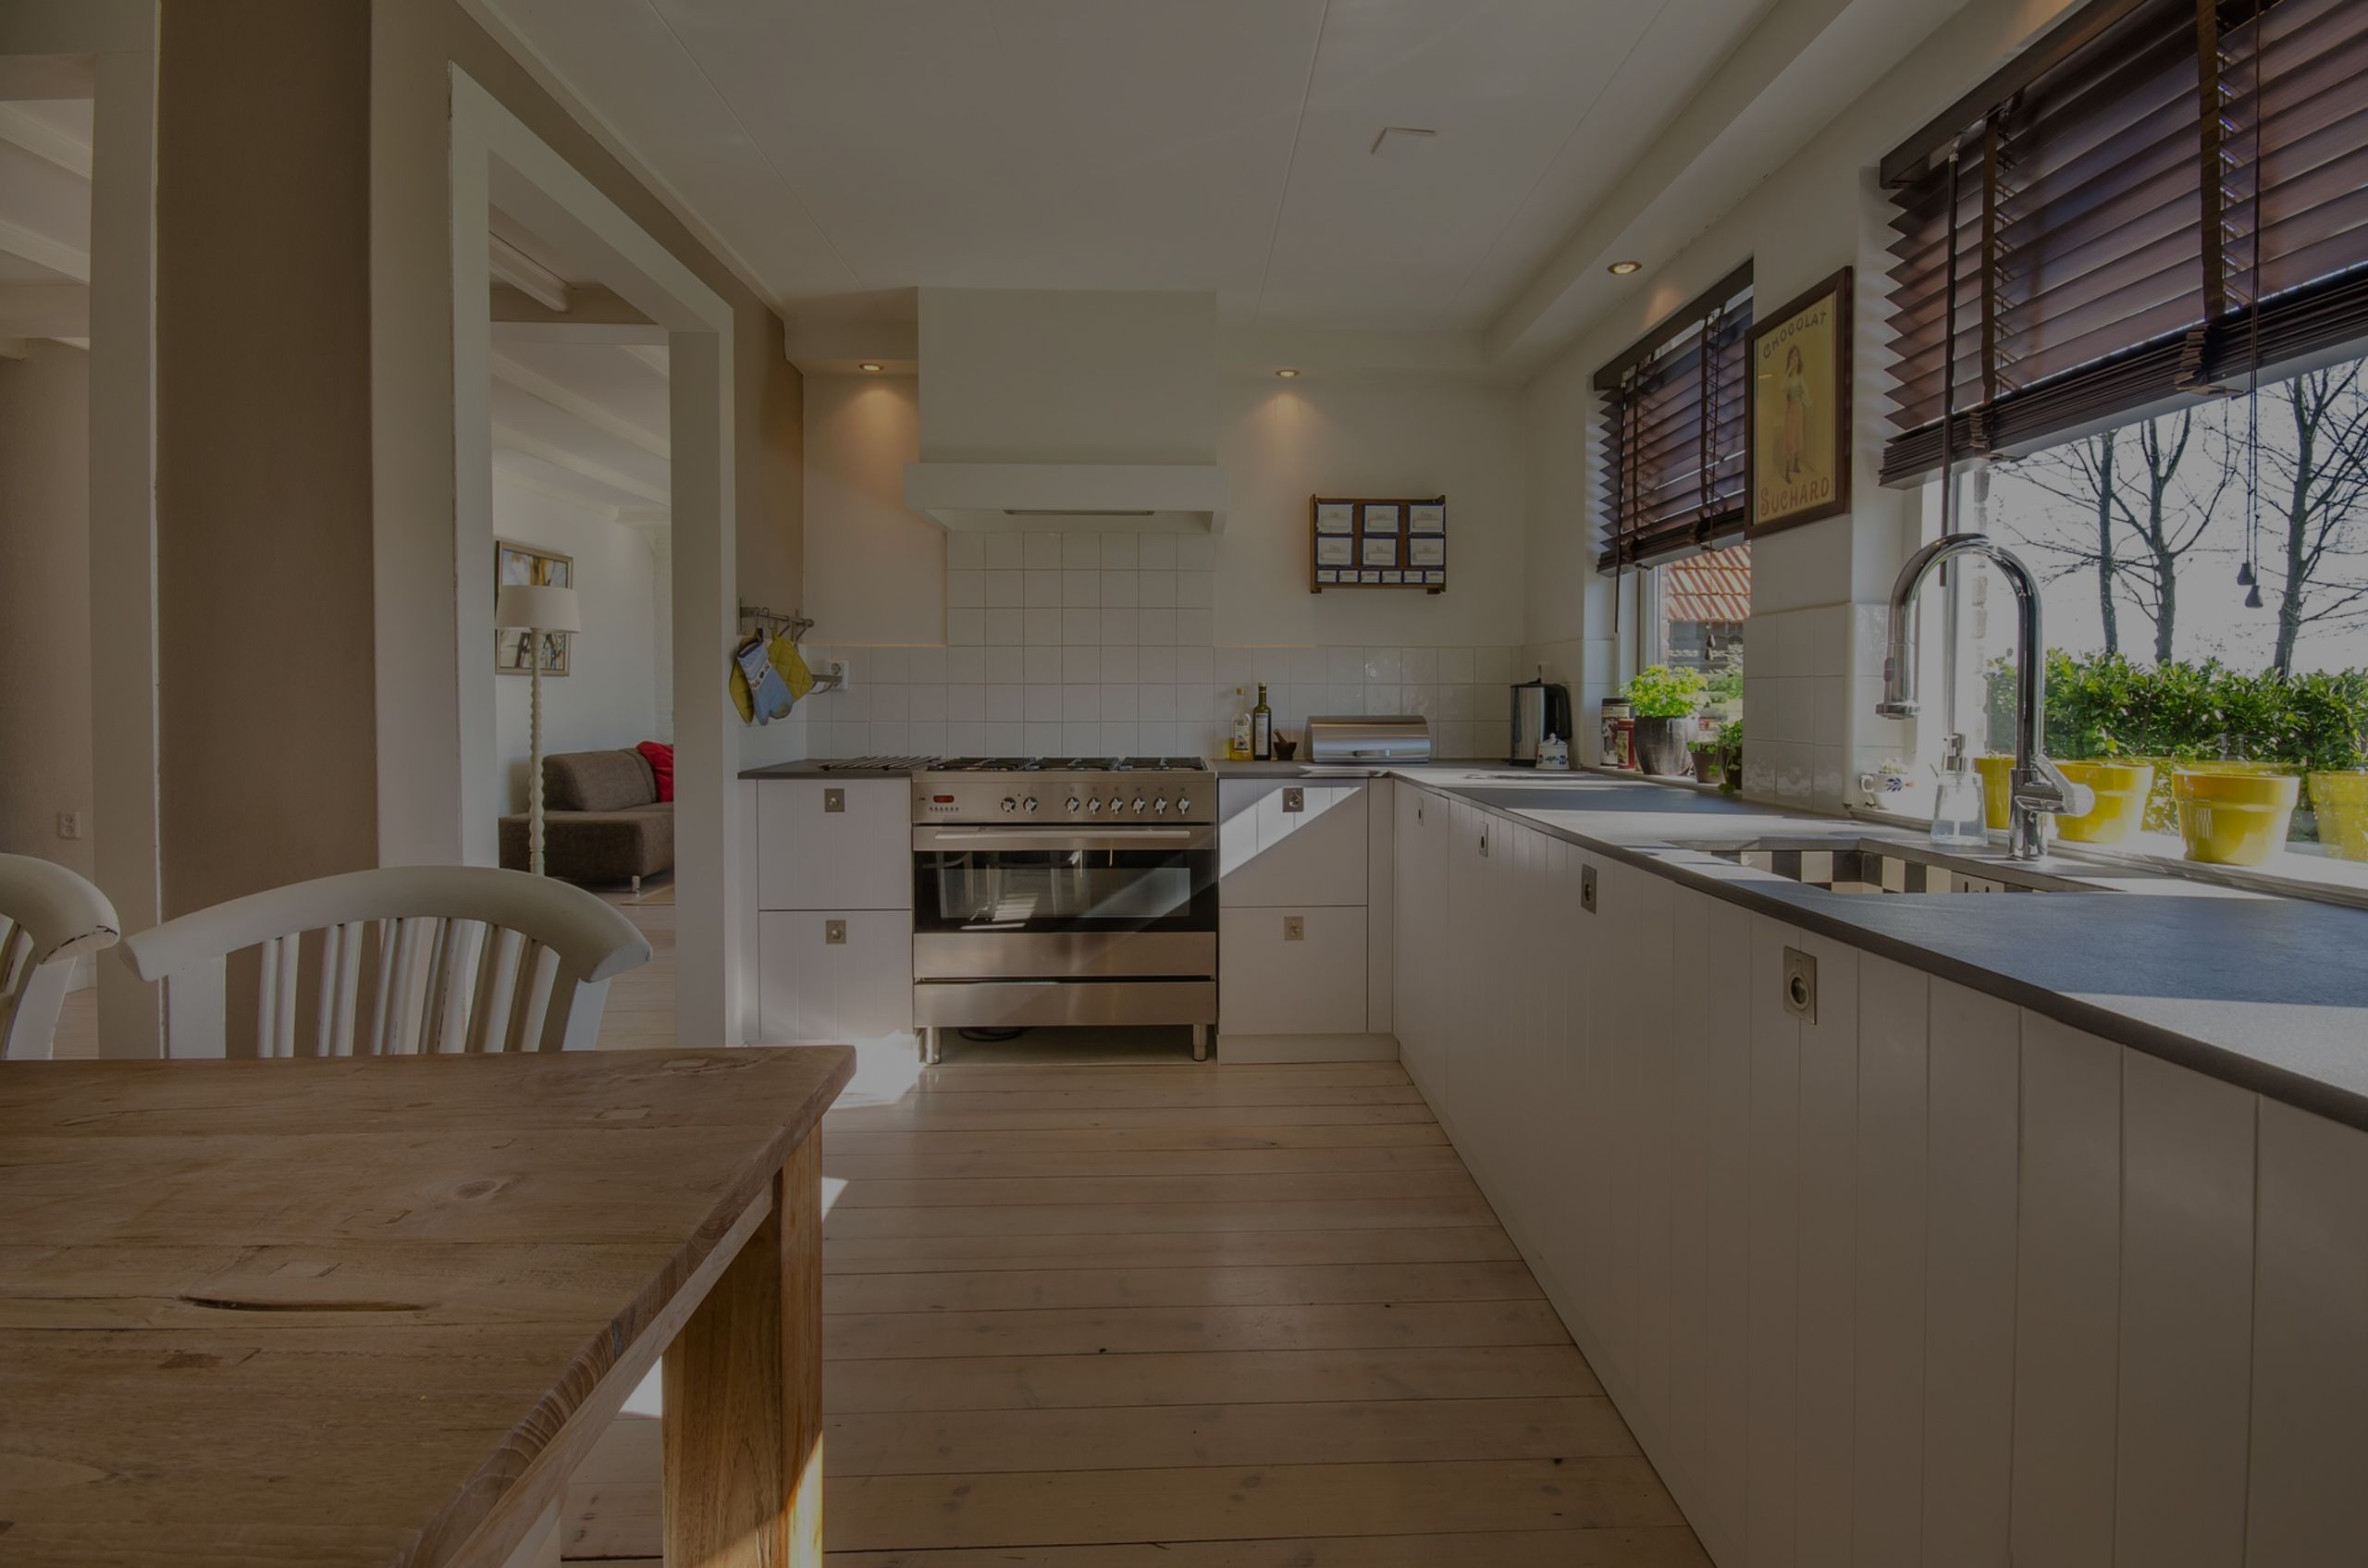 Make The Most Of Your Leesburg, VA Kitchen Space! 7 Time-tested Organizing Tips